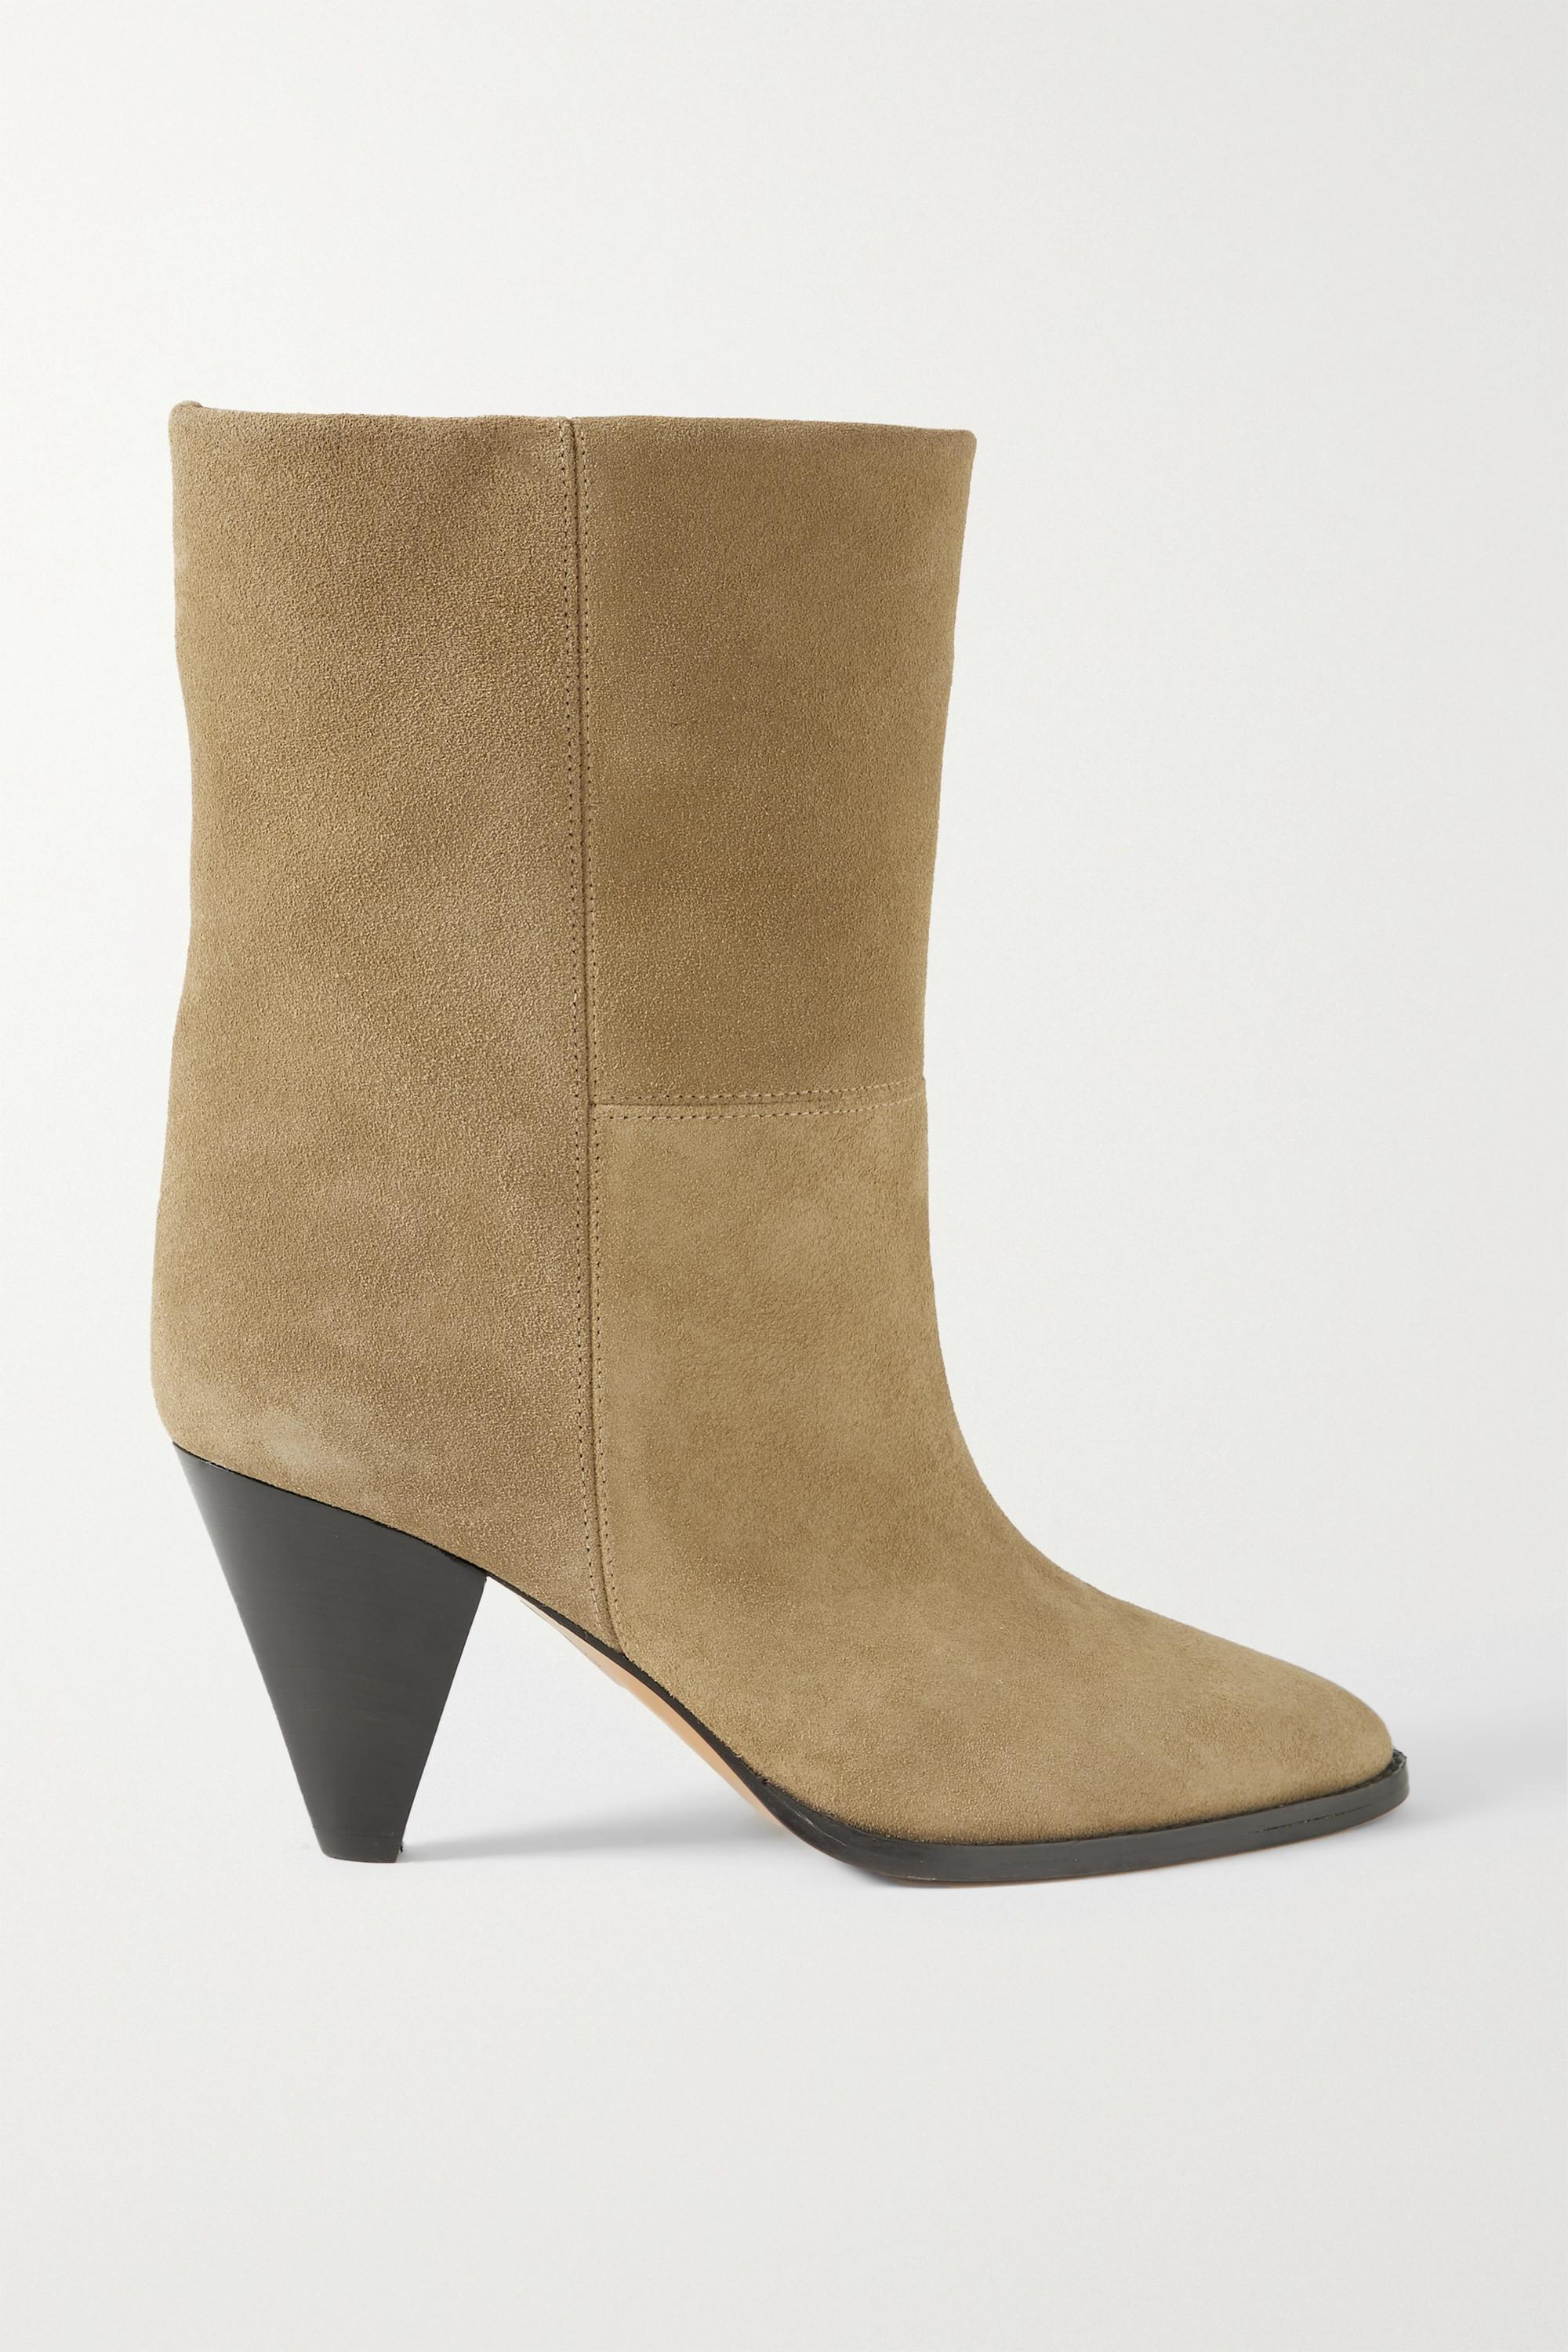 Isabel Marant Rouxa Suede Ankle Boots in Natural Lyst Australia